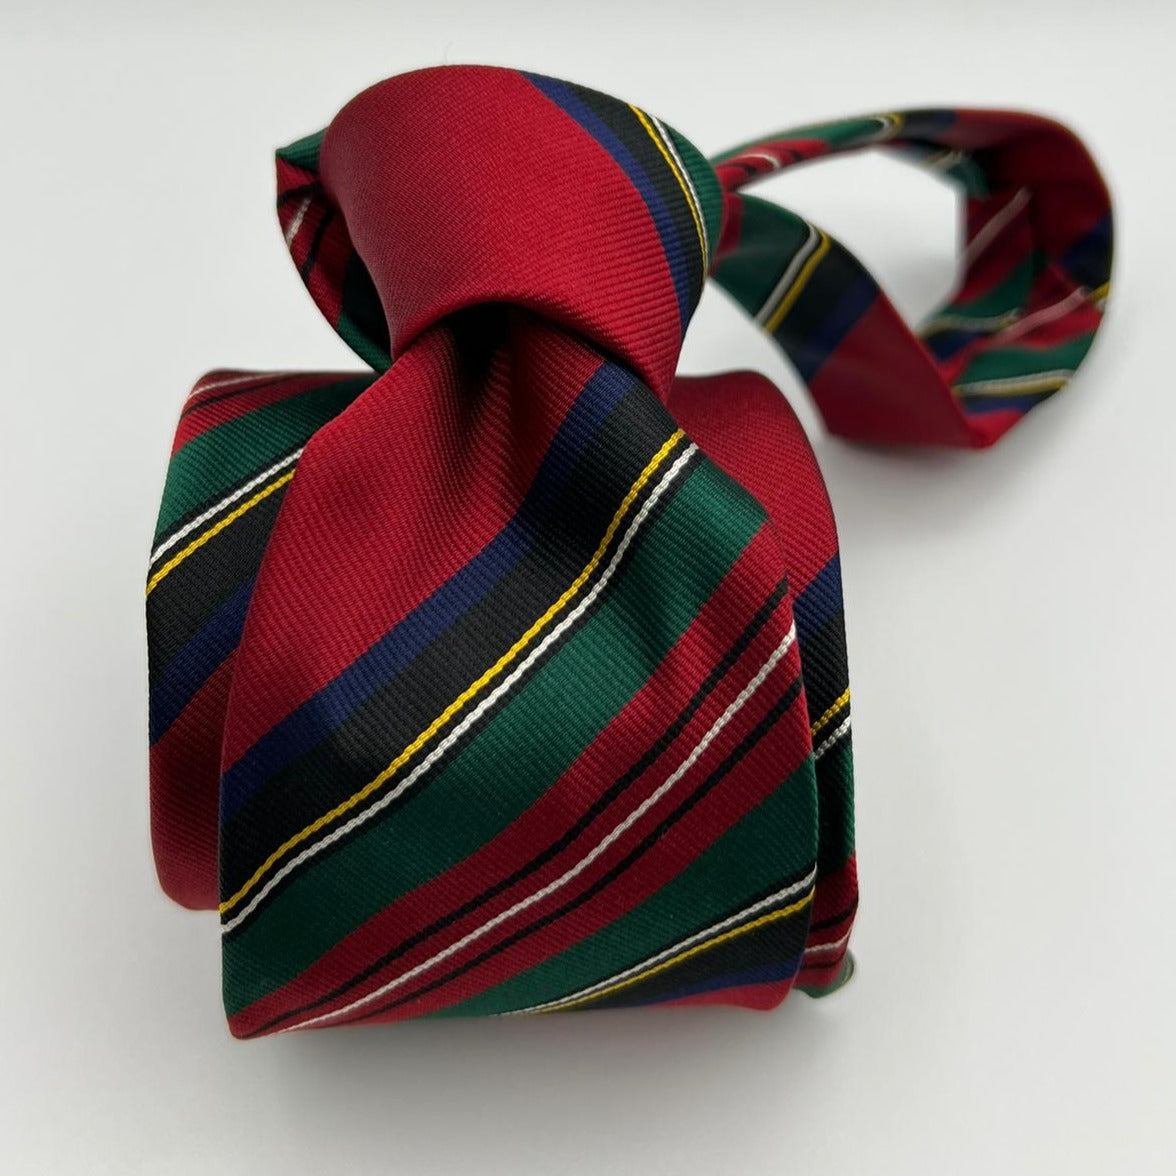 Drake's  100% Silk Tipped Red, Green, Blue and White  Stries Tie Handmade in England 8 cm x 148 cm #5326